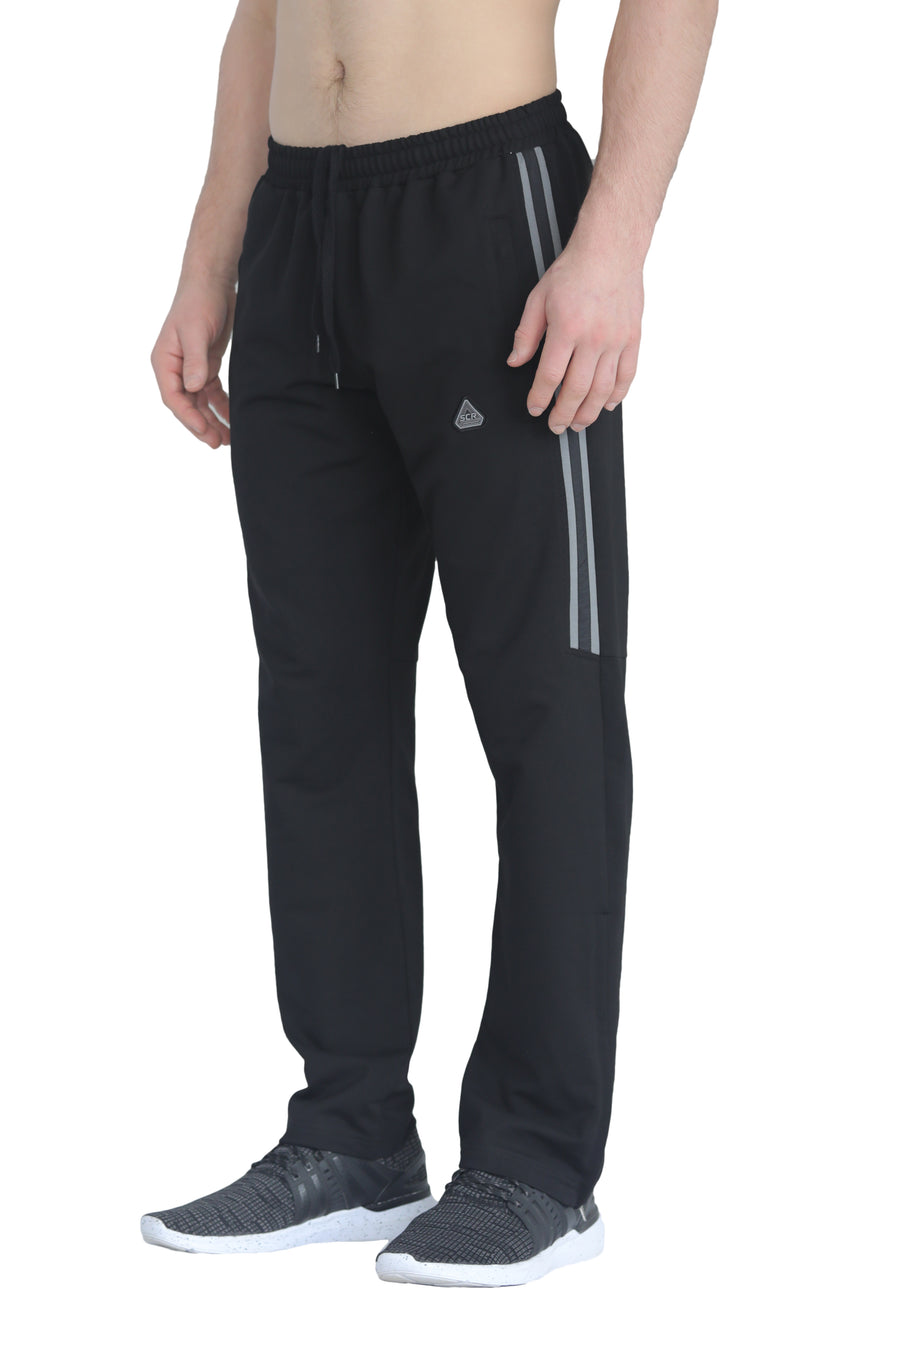 SCR Sportswear Mens Workout Pants in Mens Workout Clothing